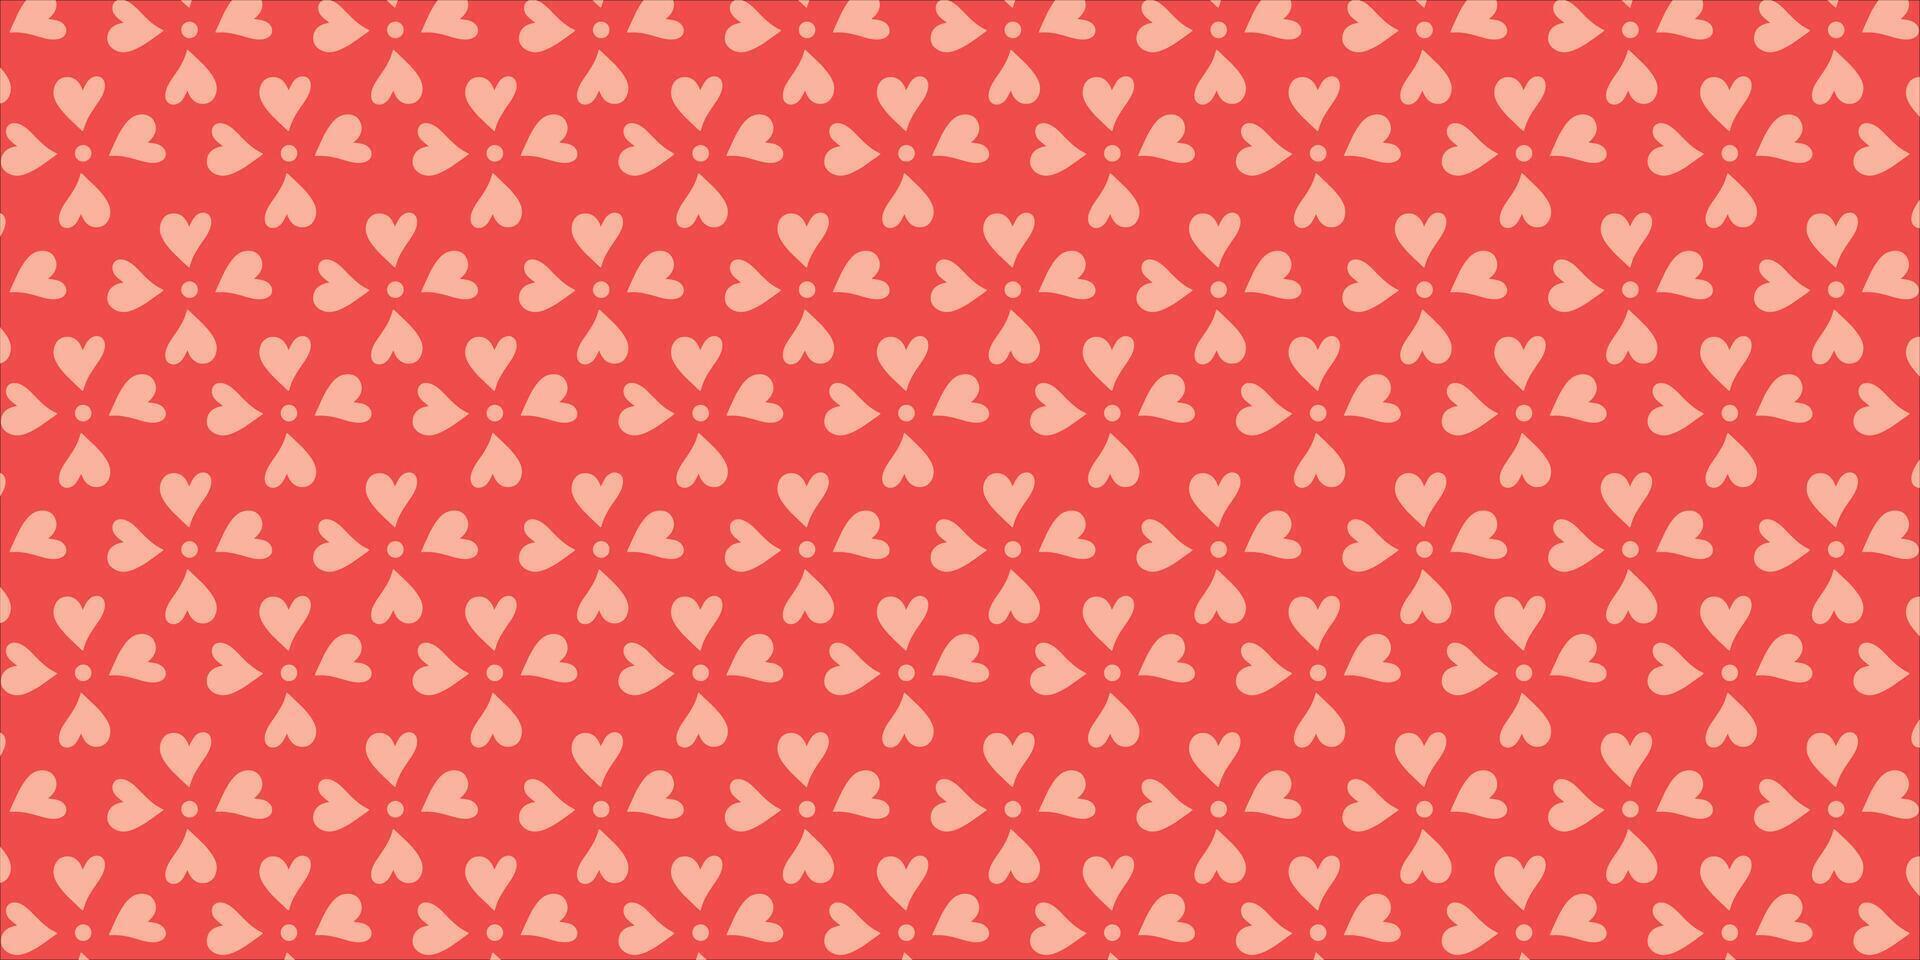 Cute love heart seamless pattern illustration. Cute romantic pink hearts background print. Valentine's day holiday, romantic wedding design. vector